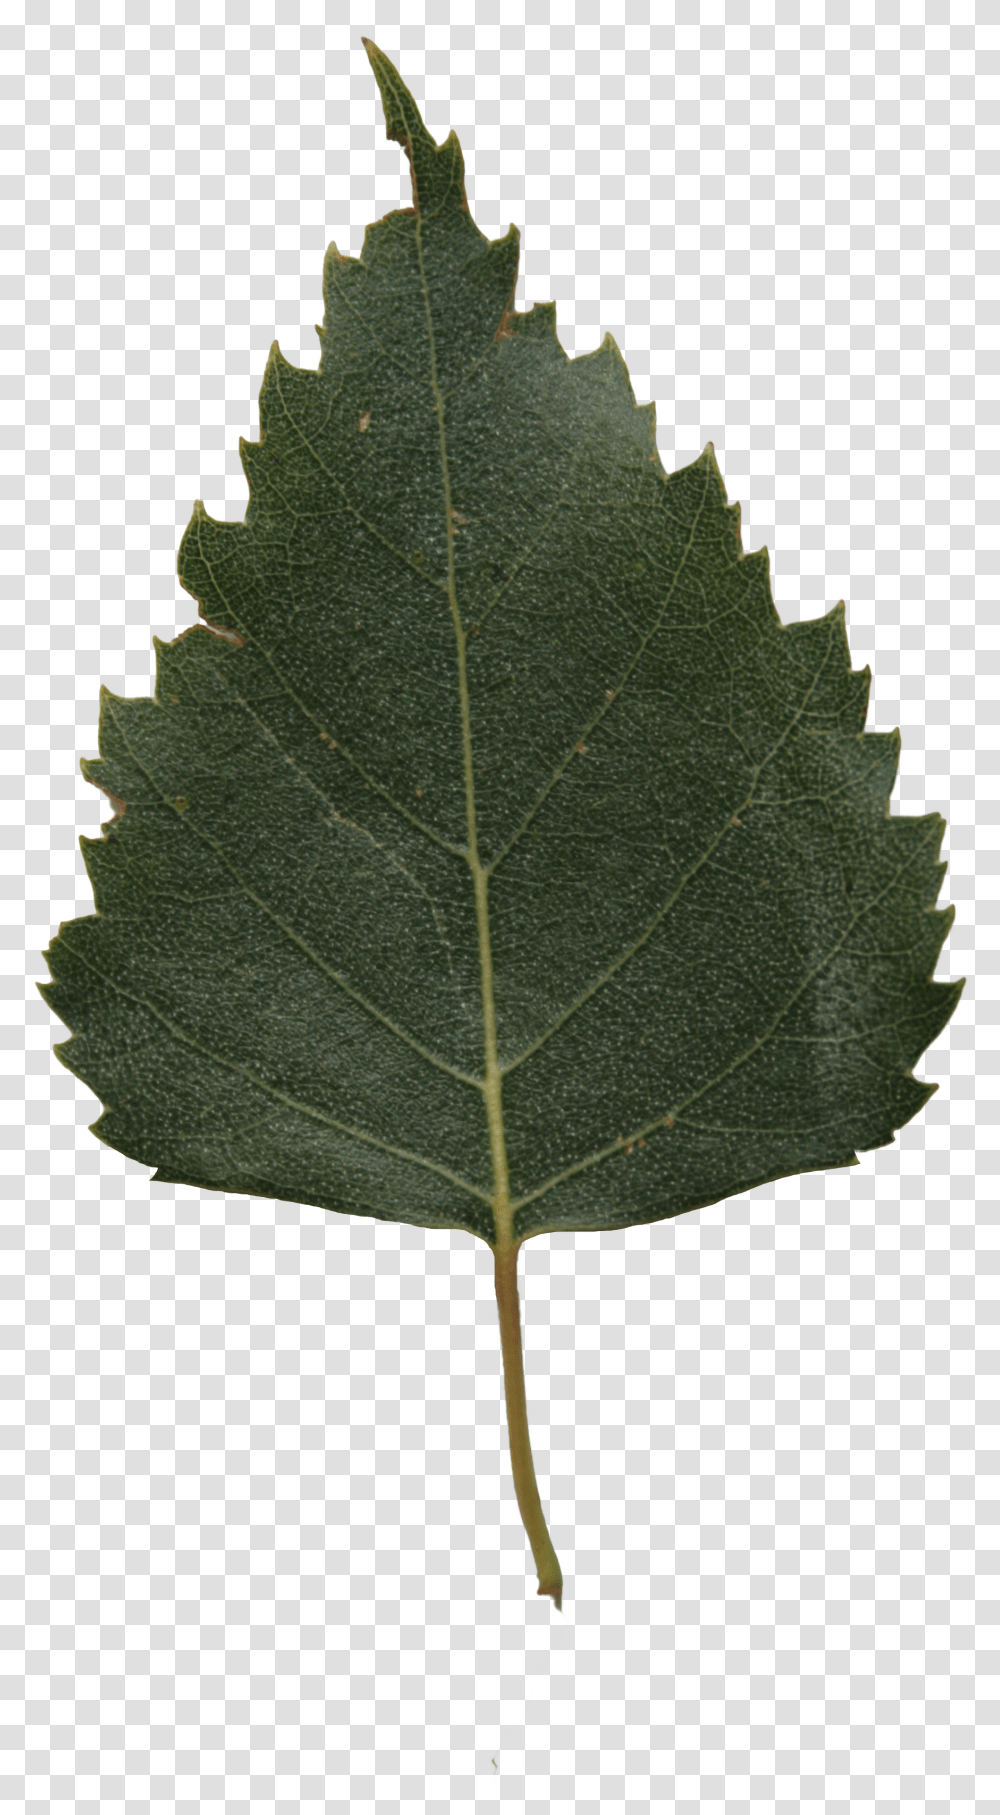 The Texture Of The Foliage Birch Tree Leaf Transparent Png